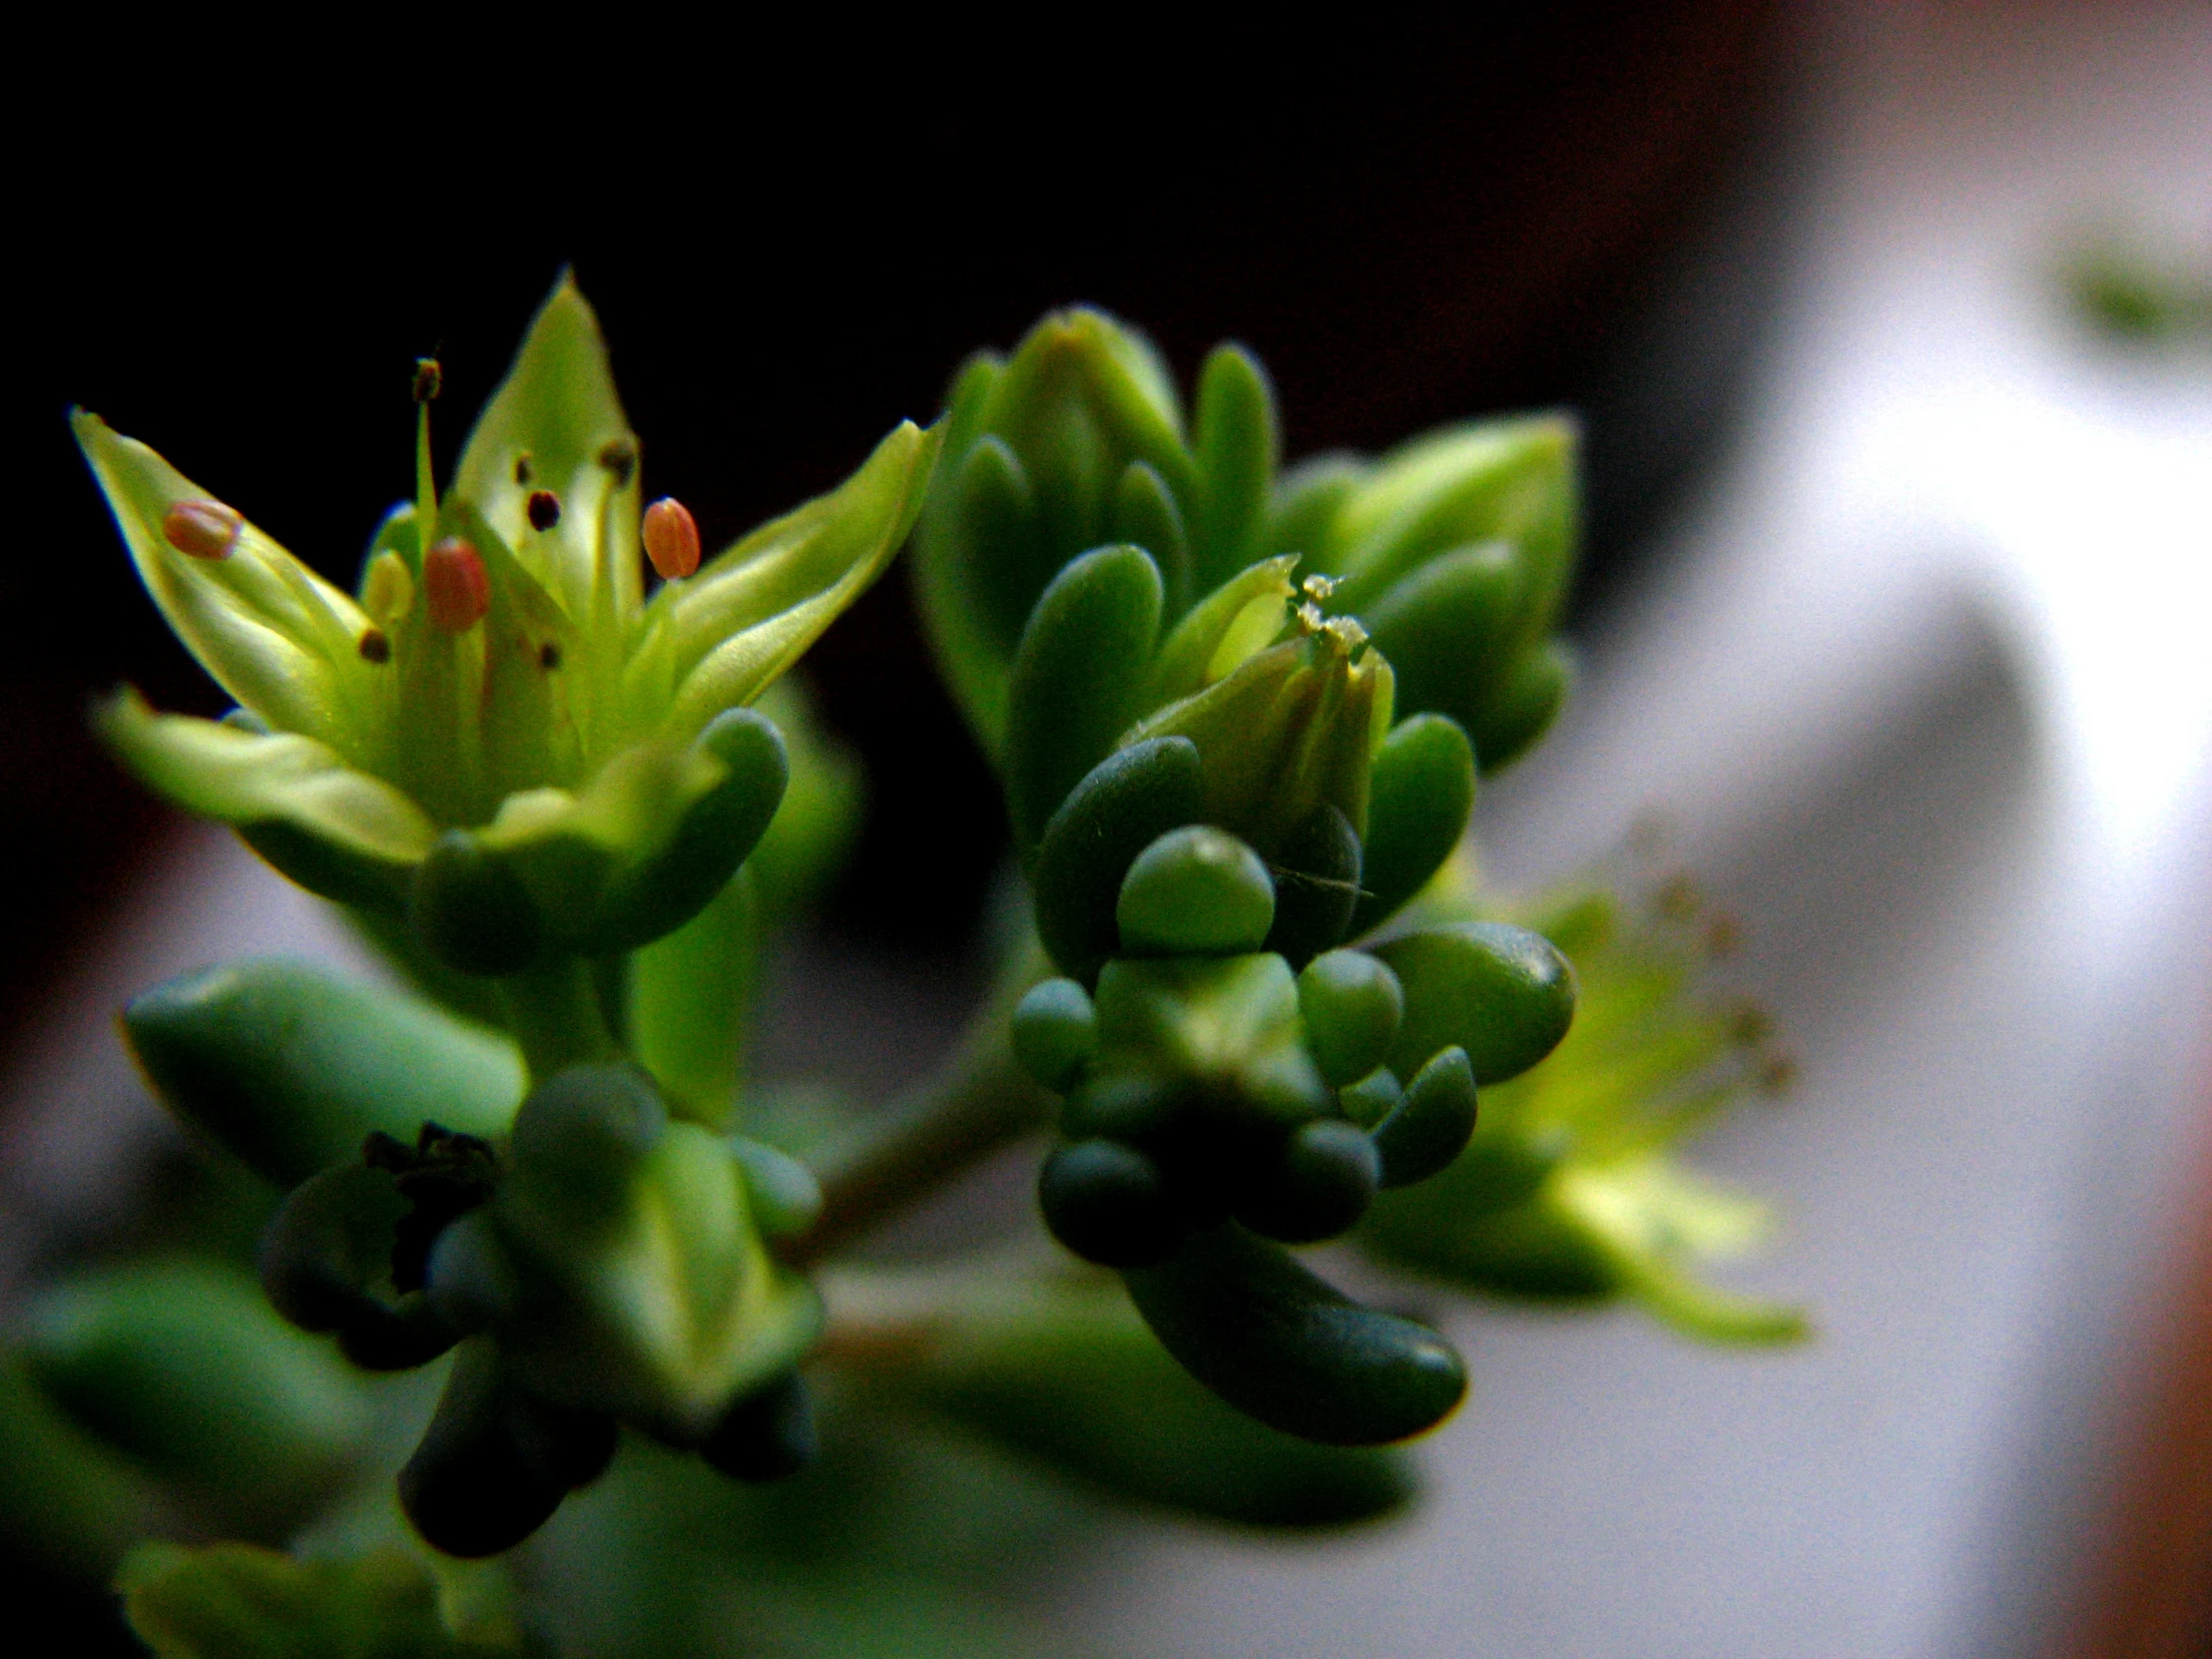 green buds grow on a leafy plant in the sunlight